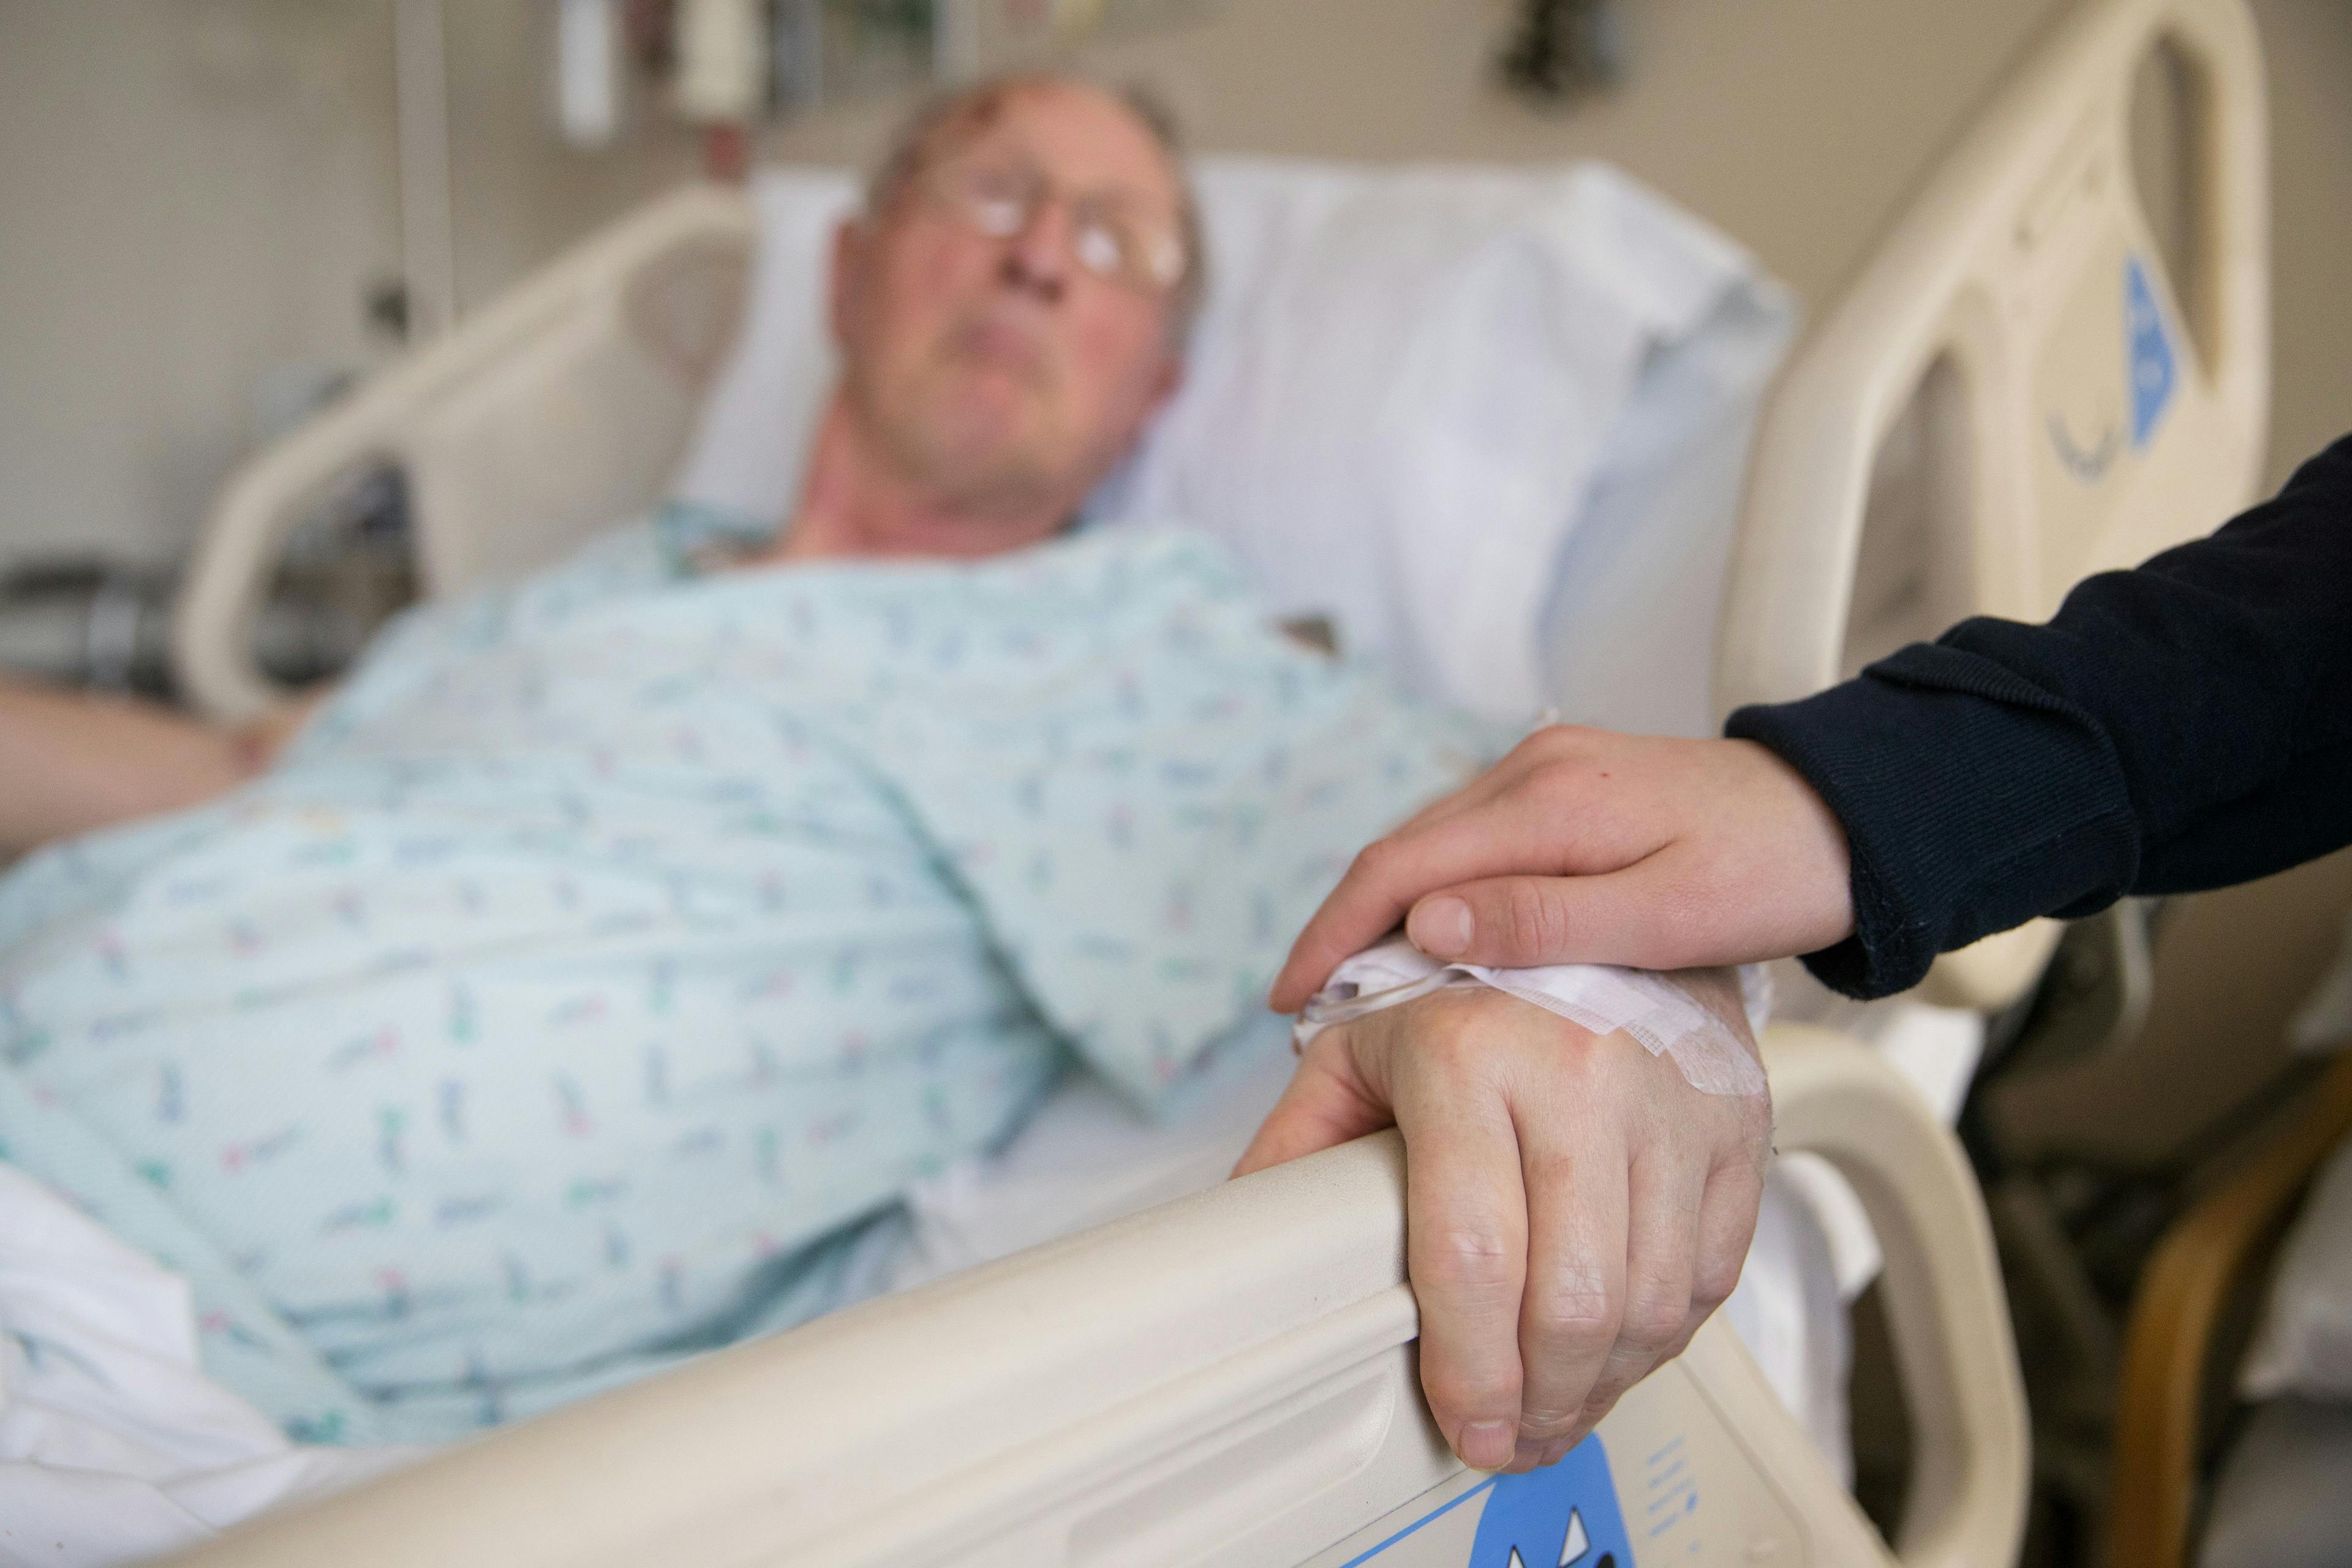 Holding hands with patient at hospital | Image credit: Mat Hayward - stock.adobe.com